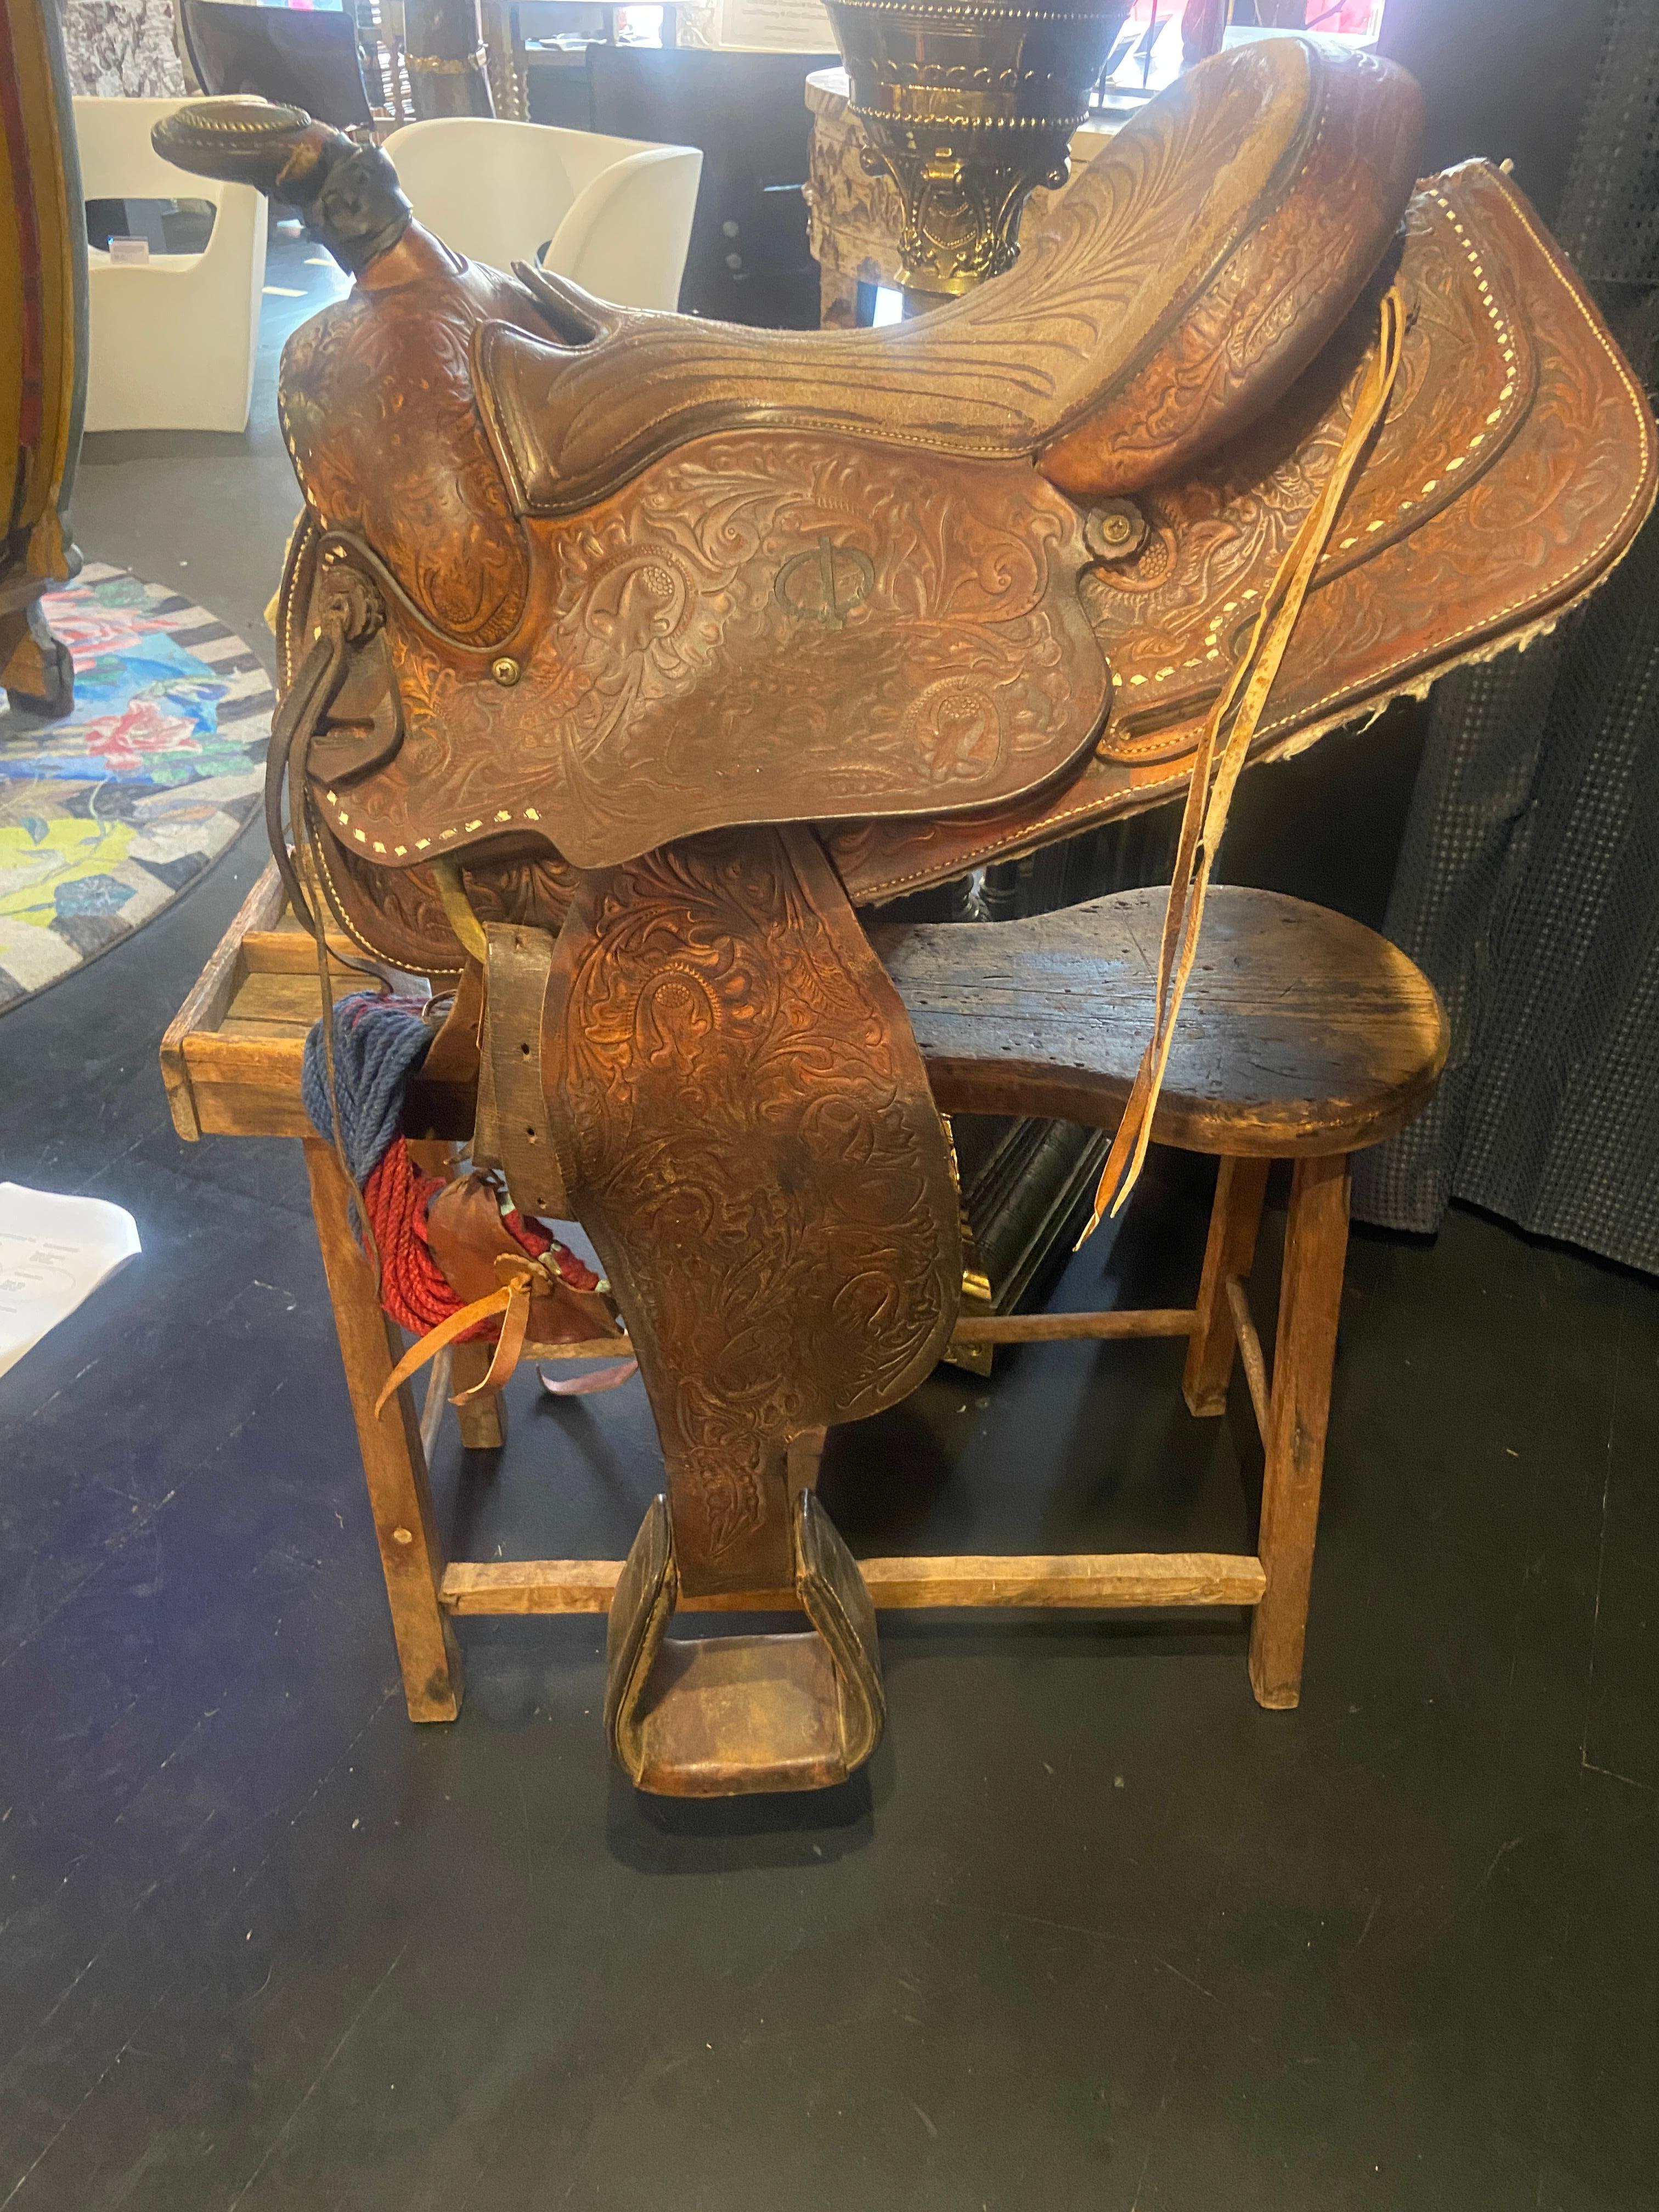 Introducing an exceptional saddle crafted in the beautiful state of Vermont during the 1980s, I present to you a remarkable piece of equestrian craftsmanship. This unique saddle stands as a testament to the skill and artistry of the Vermont artisans